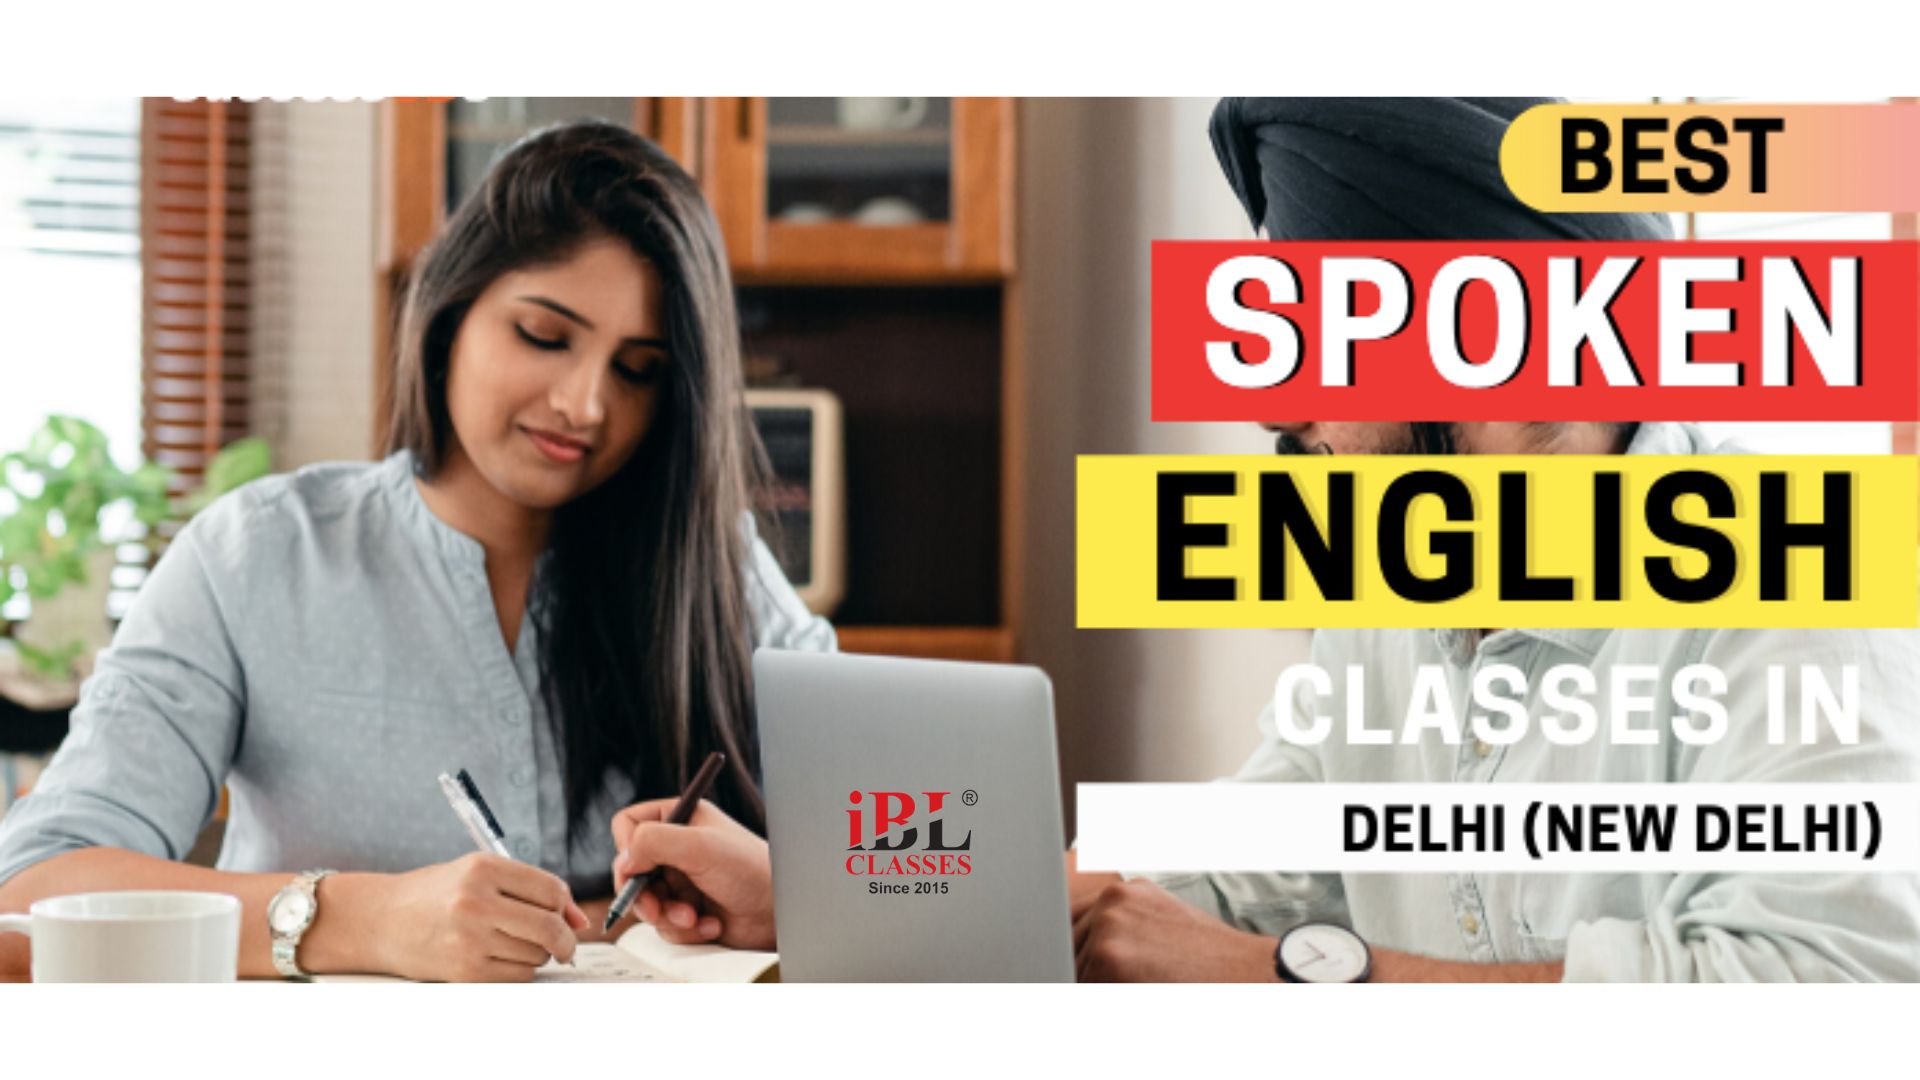 You are currently viewing IBL Classes – The Best English Speaking Institute In Delhi